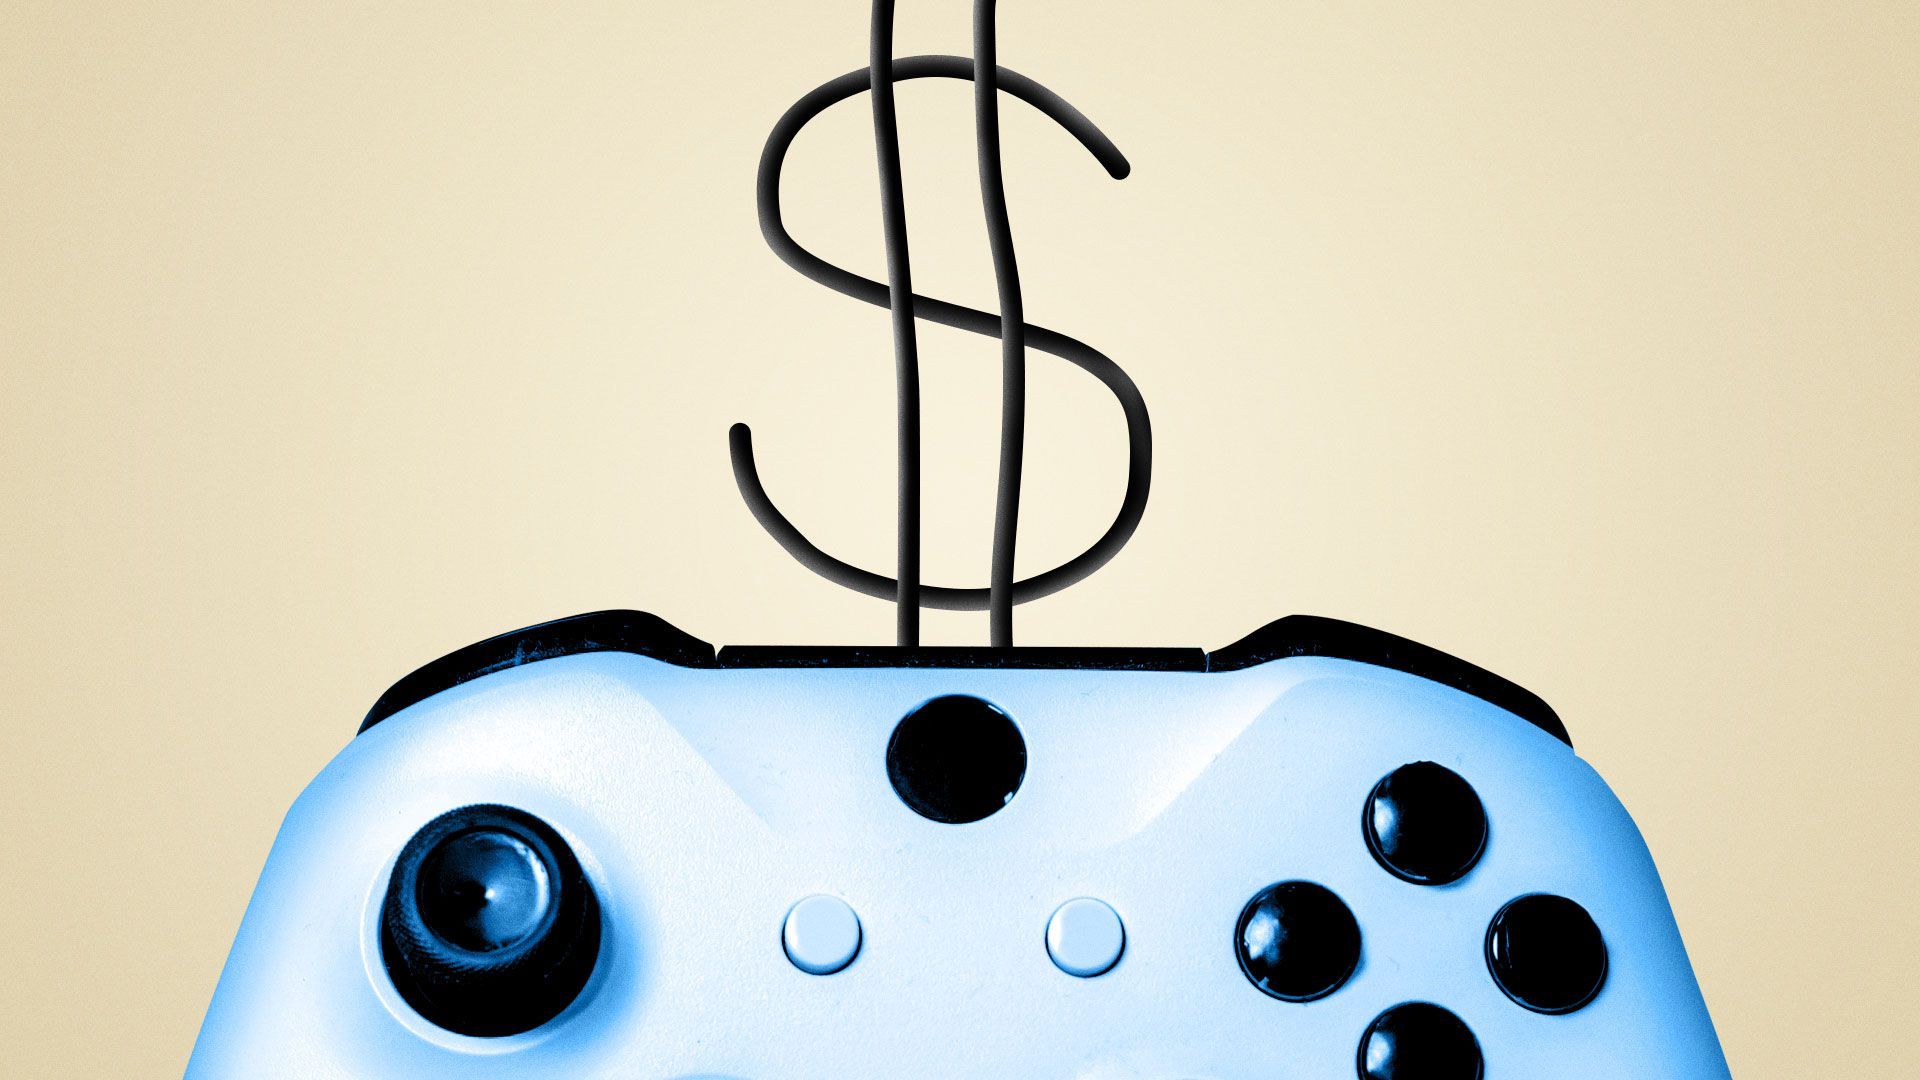 Illustration of a gaming control with a dollar sign cable